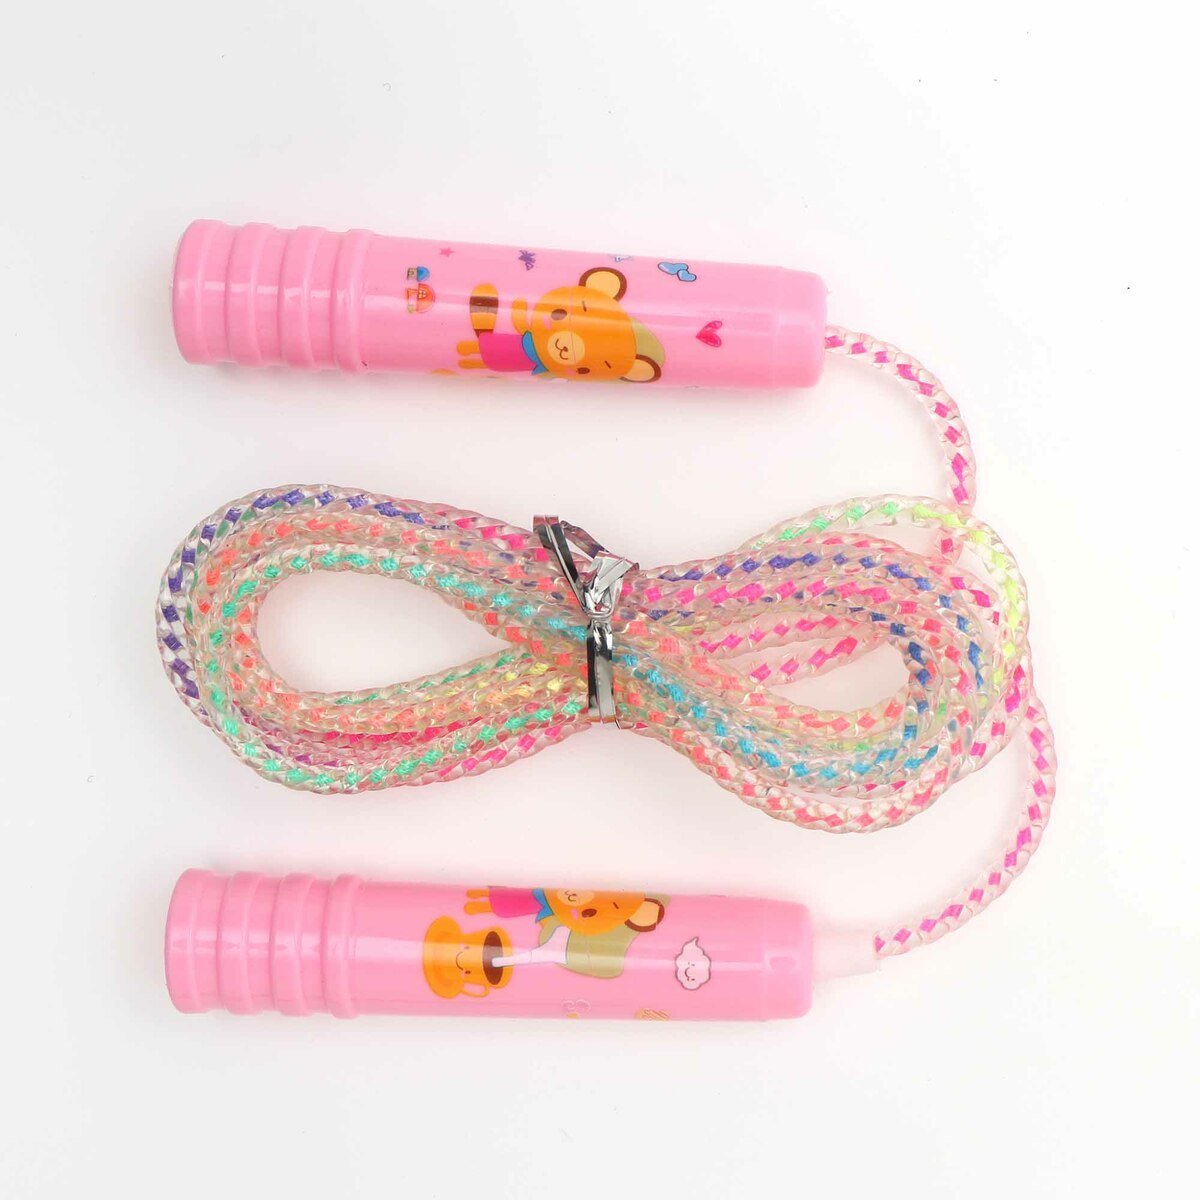 Sports Champion Jump Rope 619 Assorted Color & Design